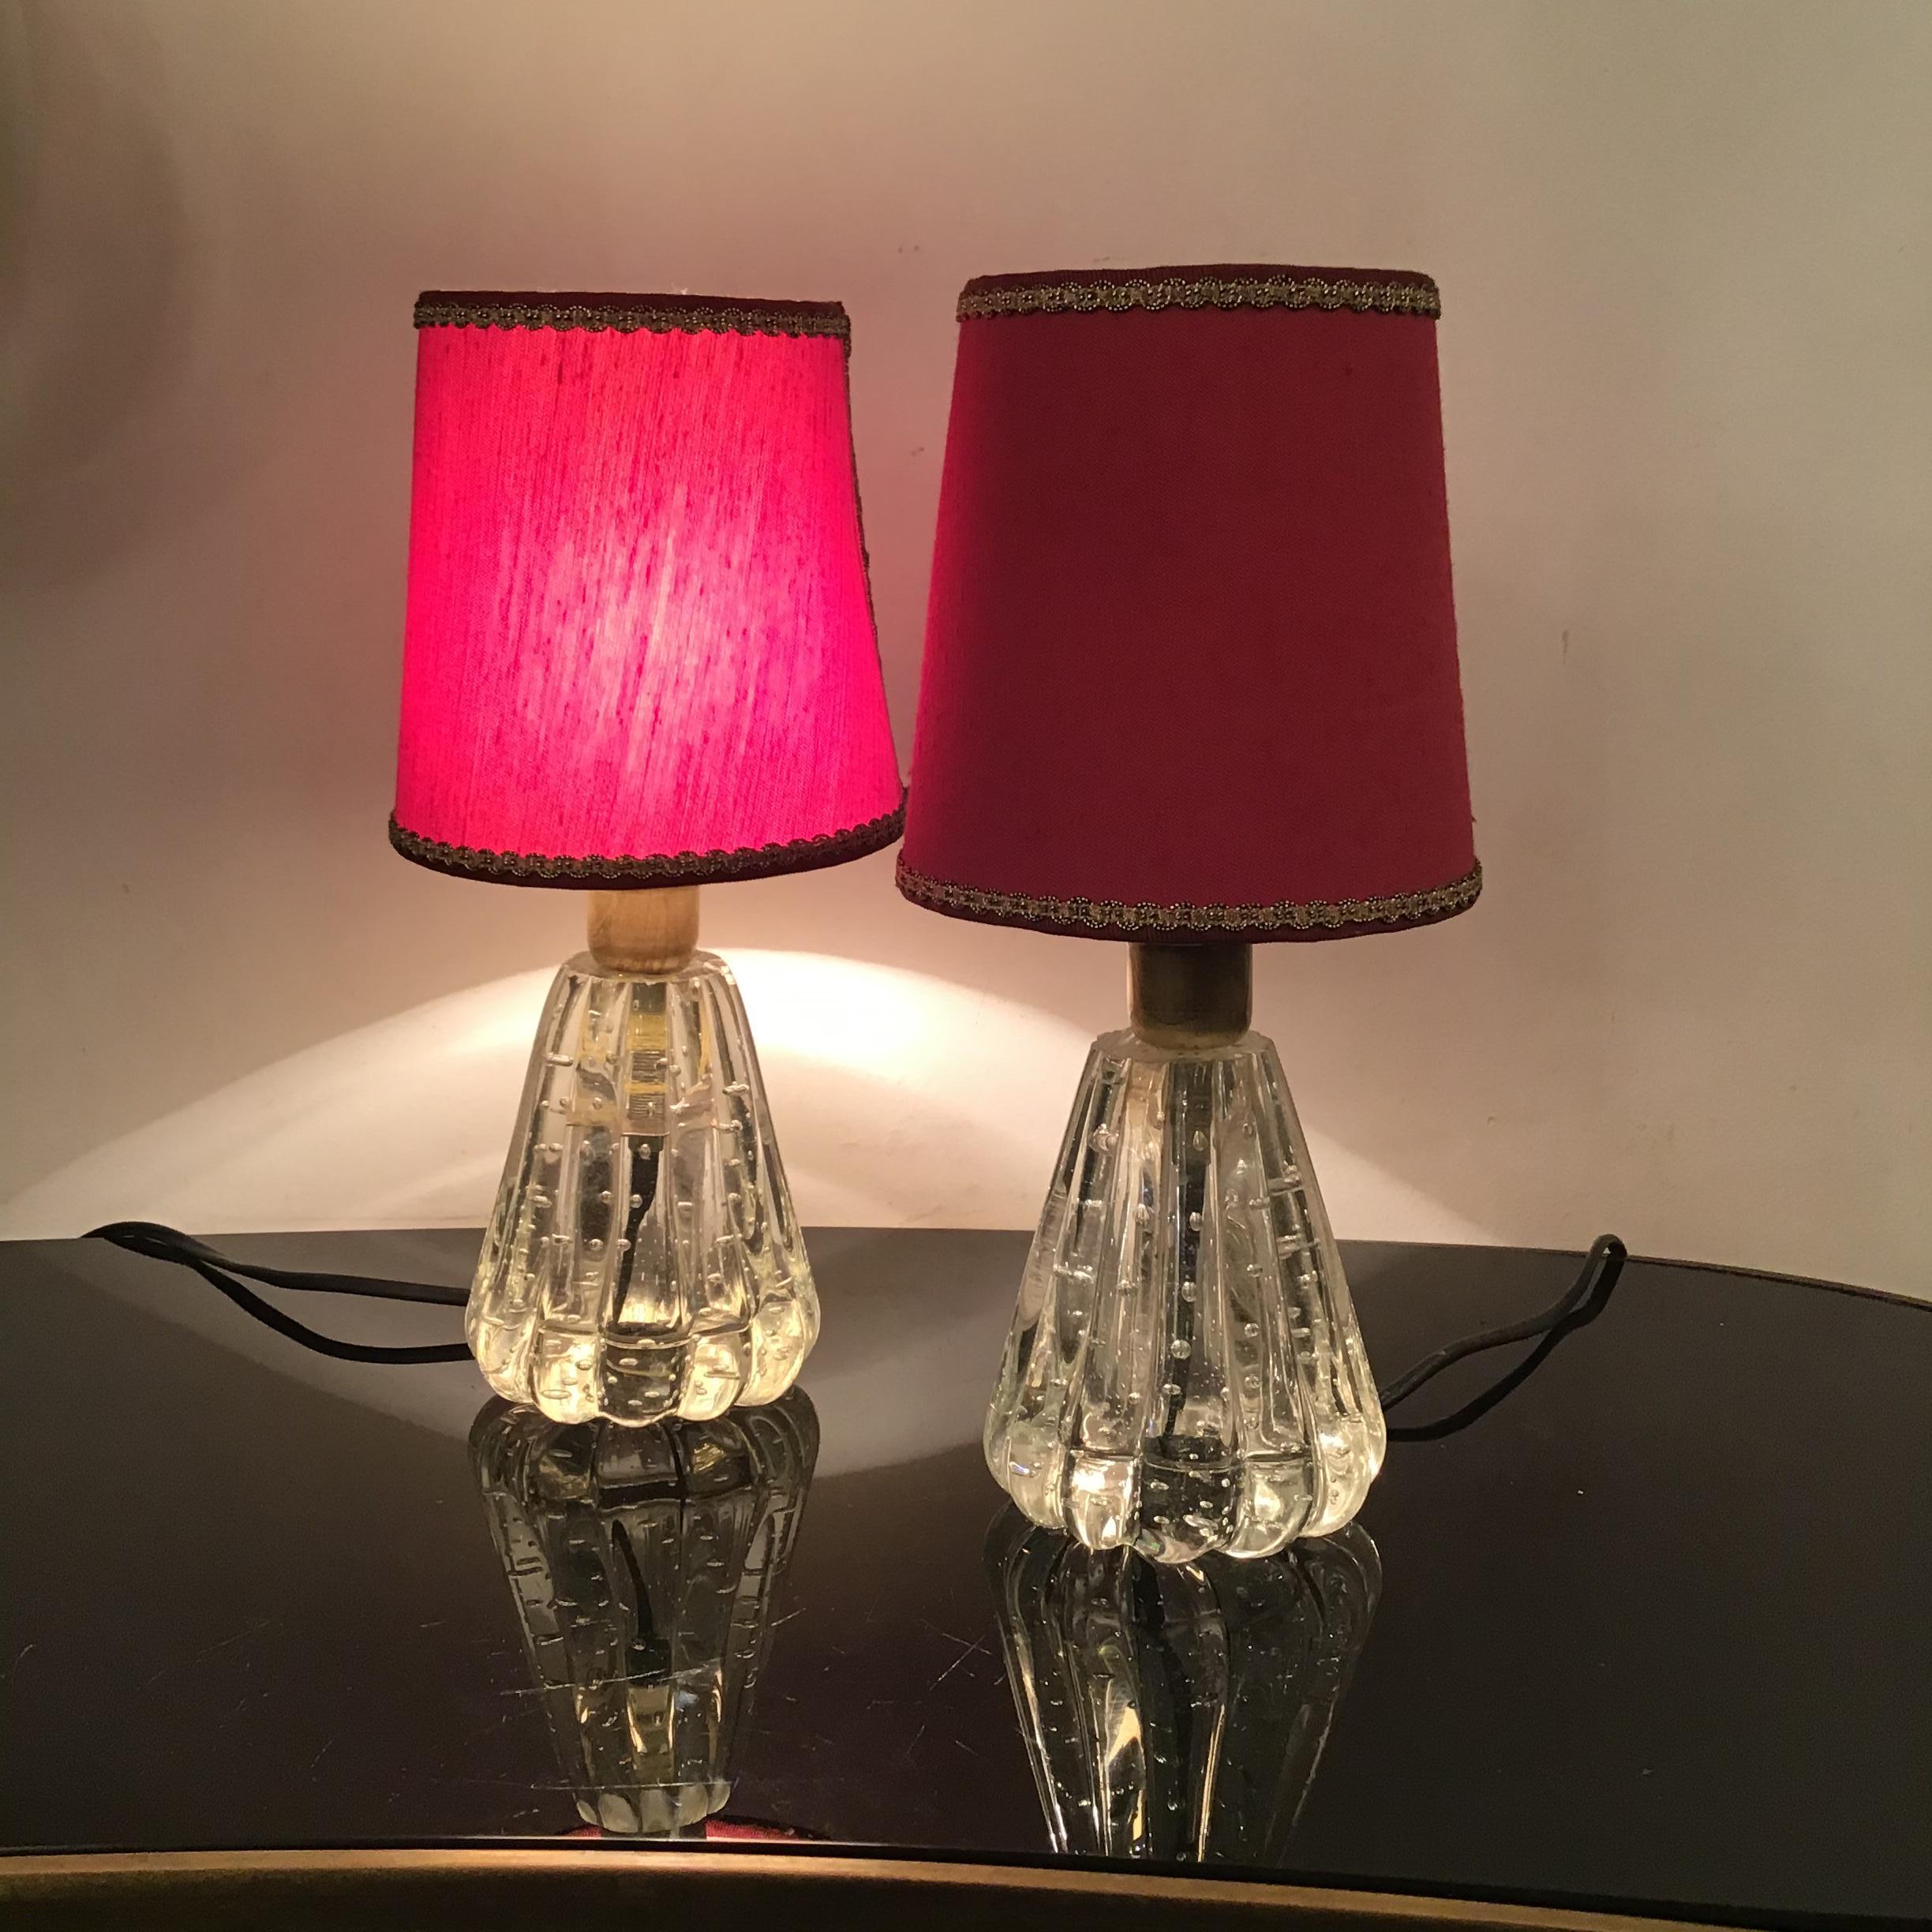 Barovier e Toso Table Lamps Murano Glass Brass Fabric Lampshade 1940 Italy In Excellent Condition For Sale In Milano, IT